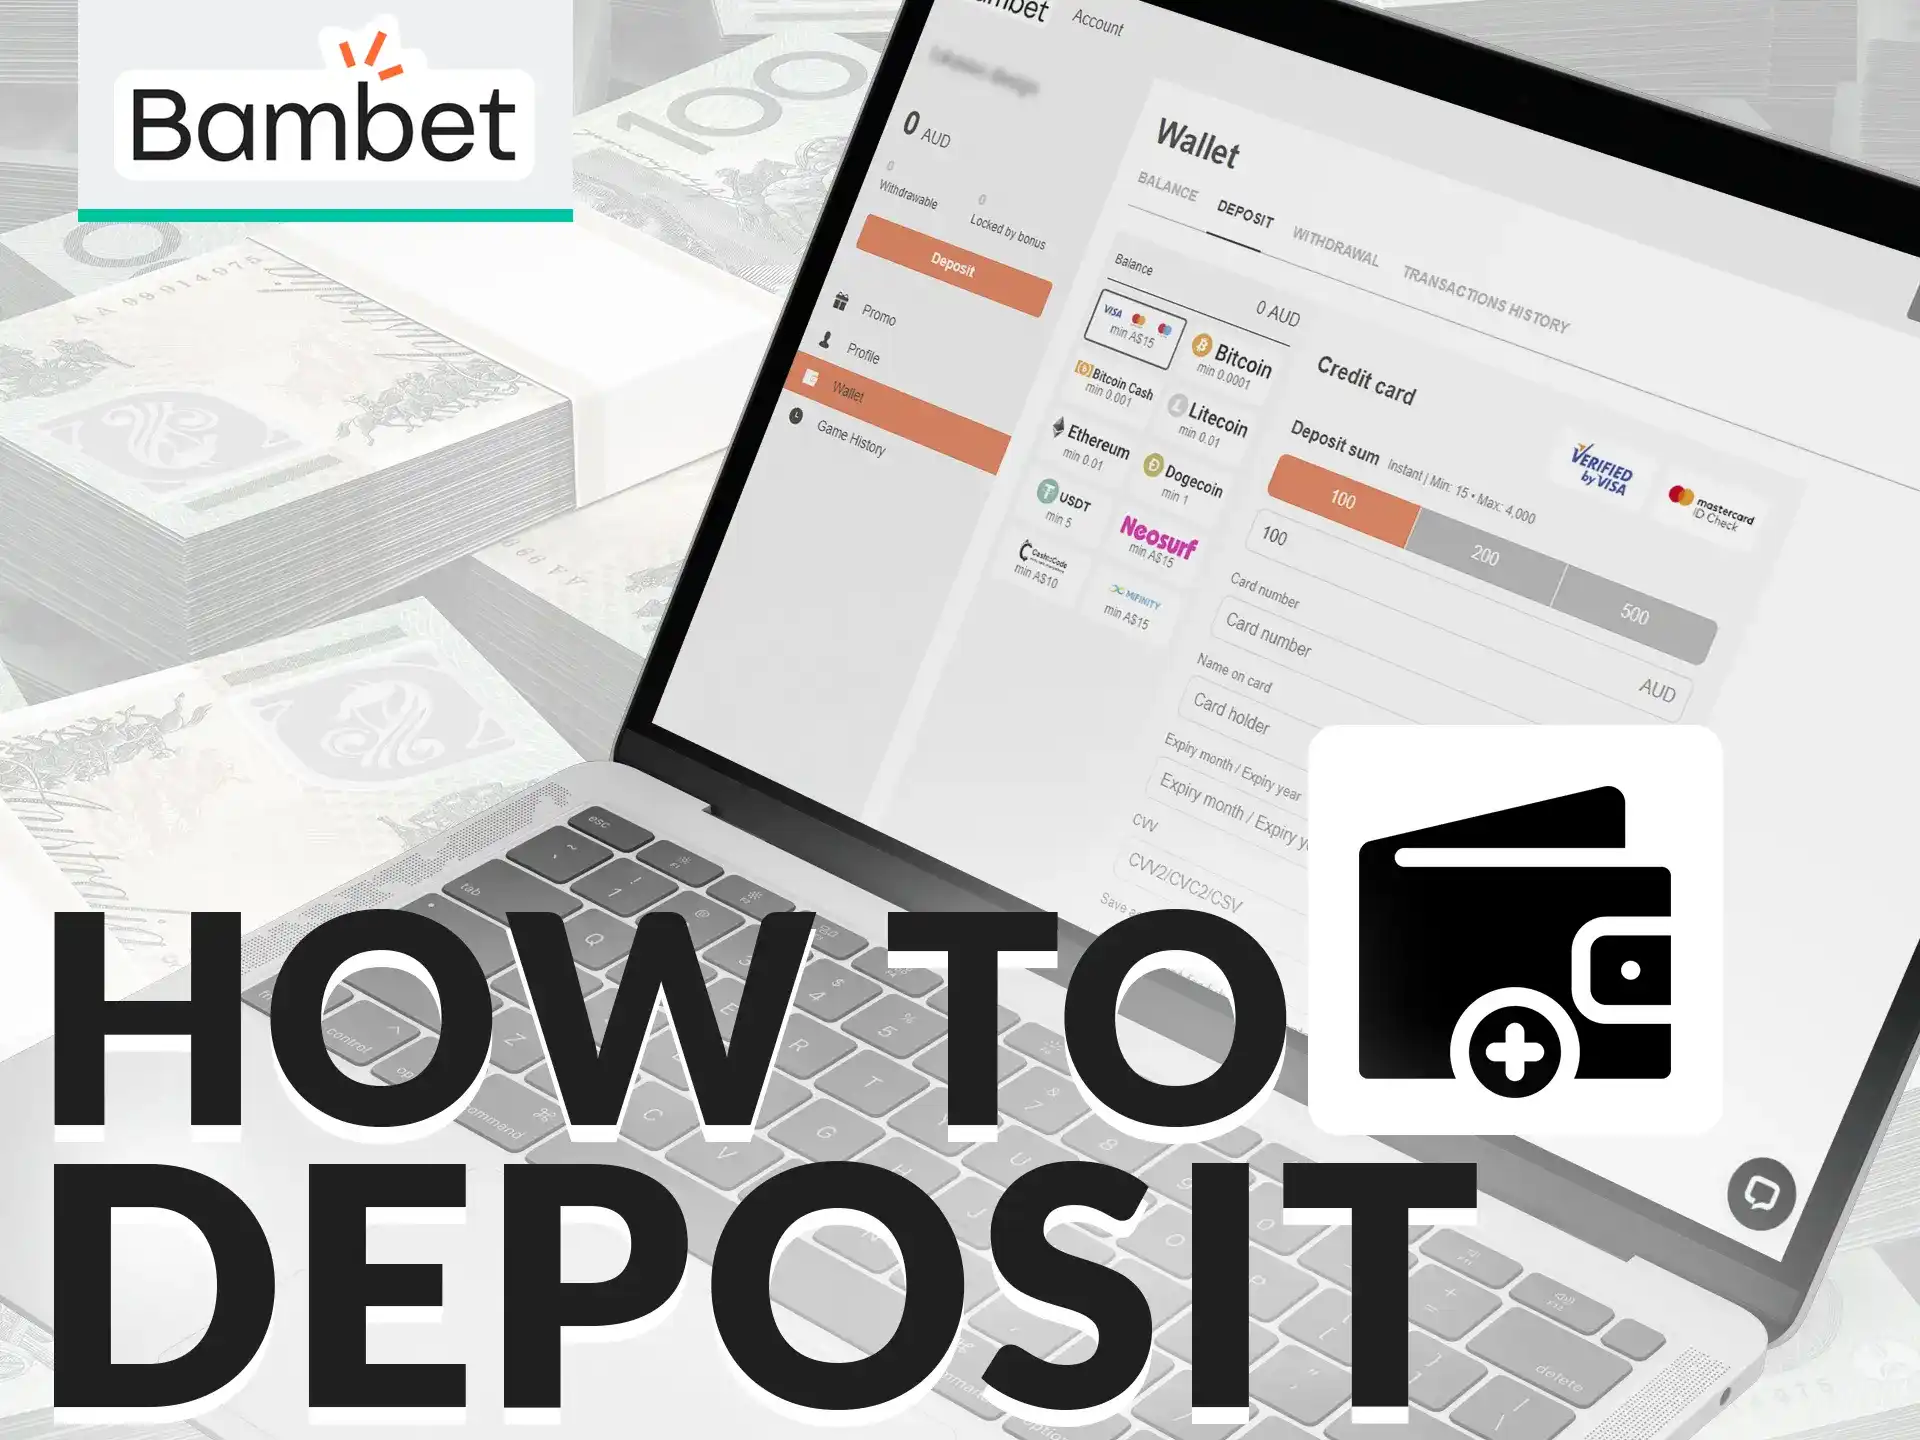 To deposit to your Bambet account follow the instructions.